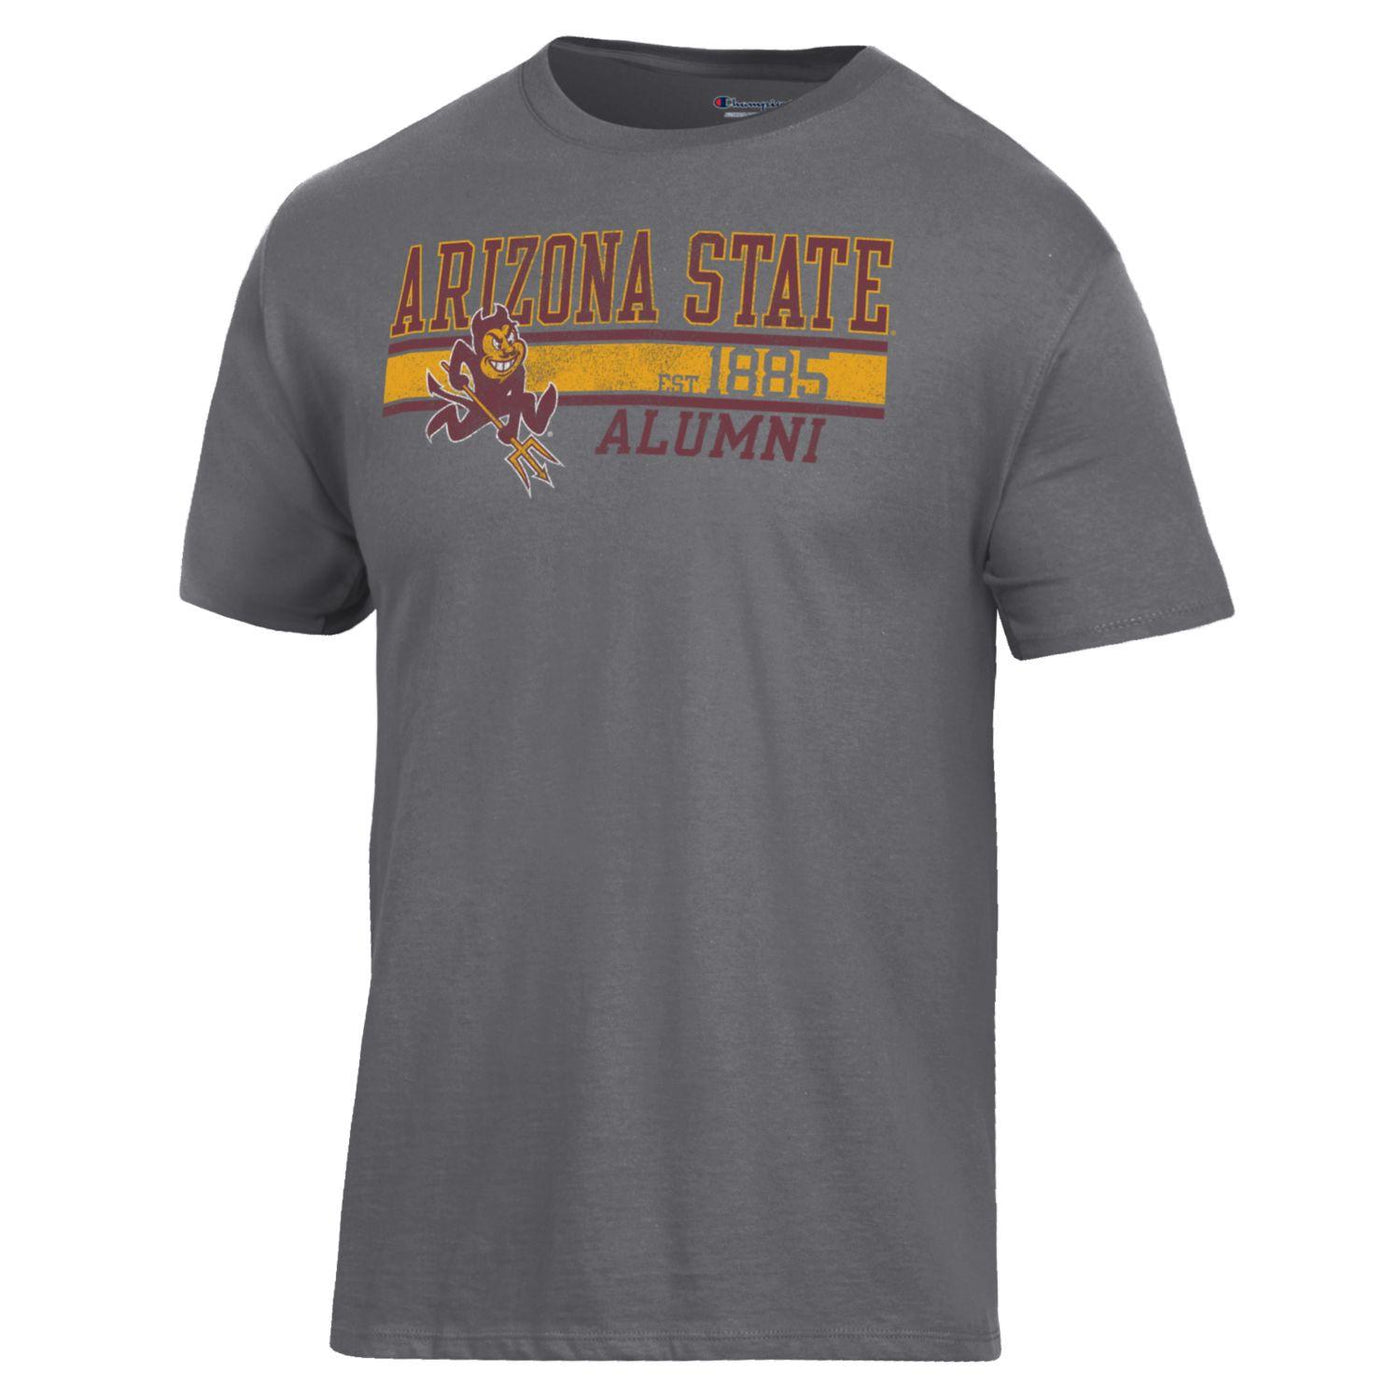 ASU gray alumni tee with 'Arizona State, EST 1885, Alumni' lettering over 3 gold and maroon stripes with a Sparky on the right side